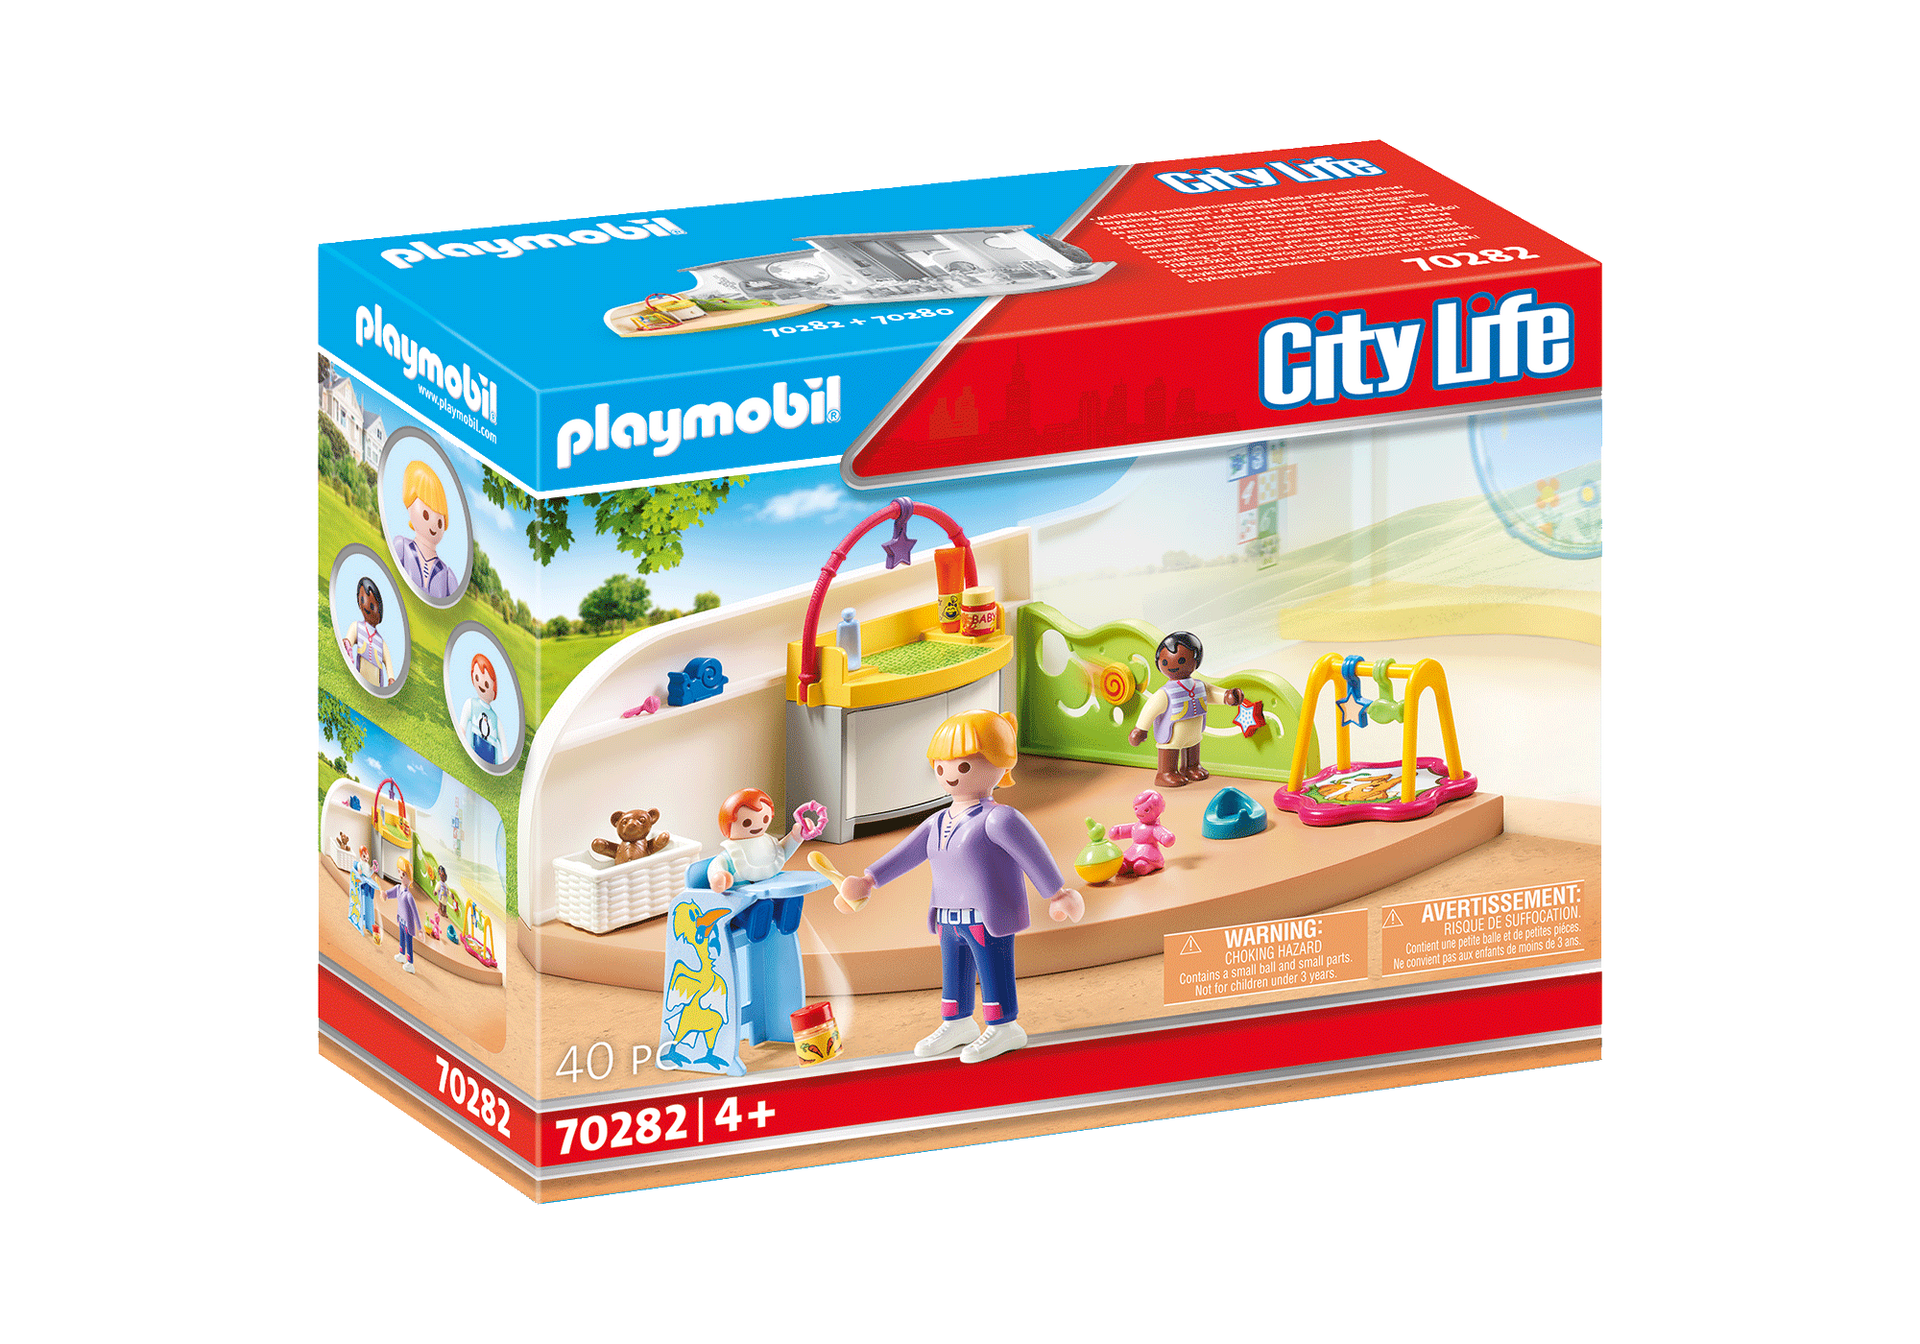 PLAYMOBIL TABLE ROUND OF 7 CM DIAMETER TABLE ¡CONDITION NEW 